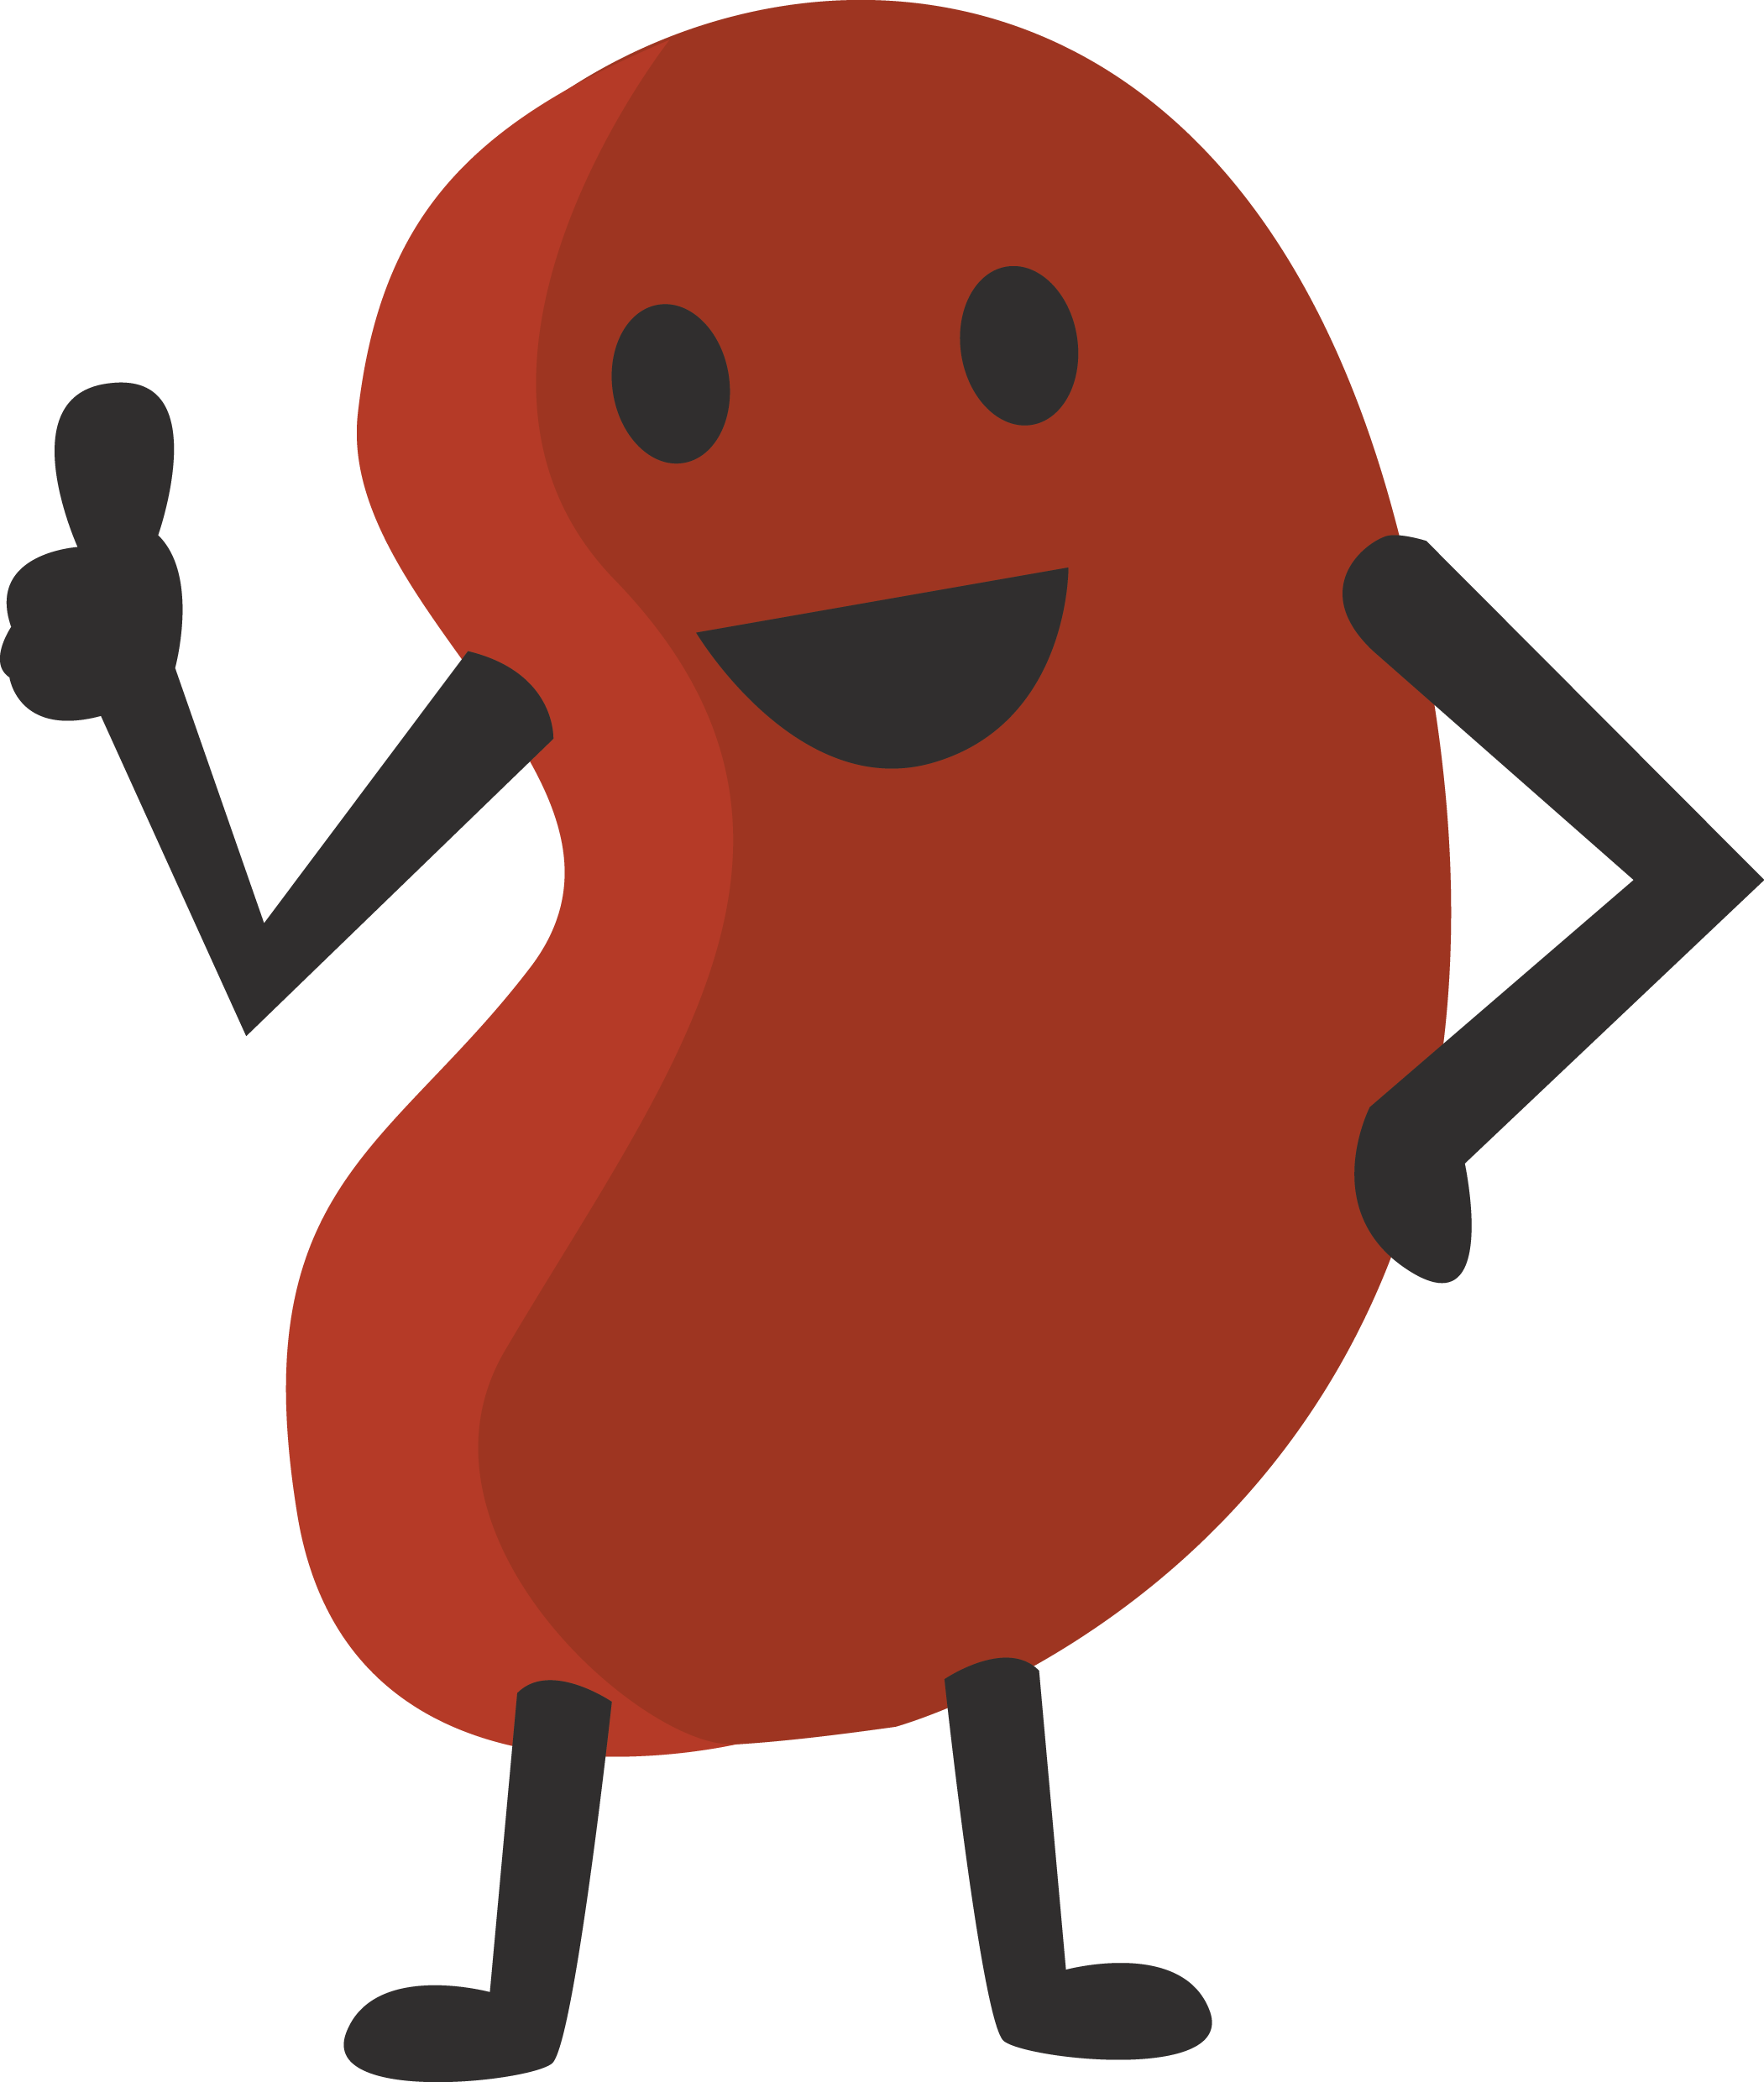 Animated kidney bean free image download